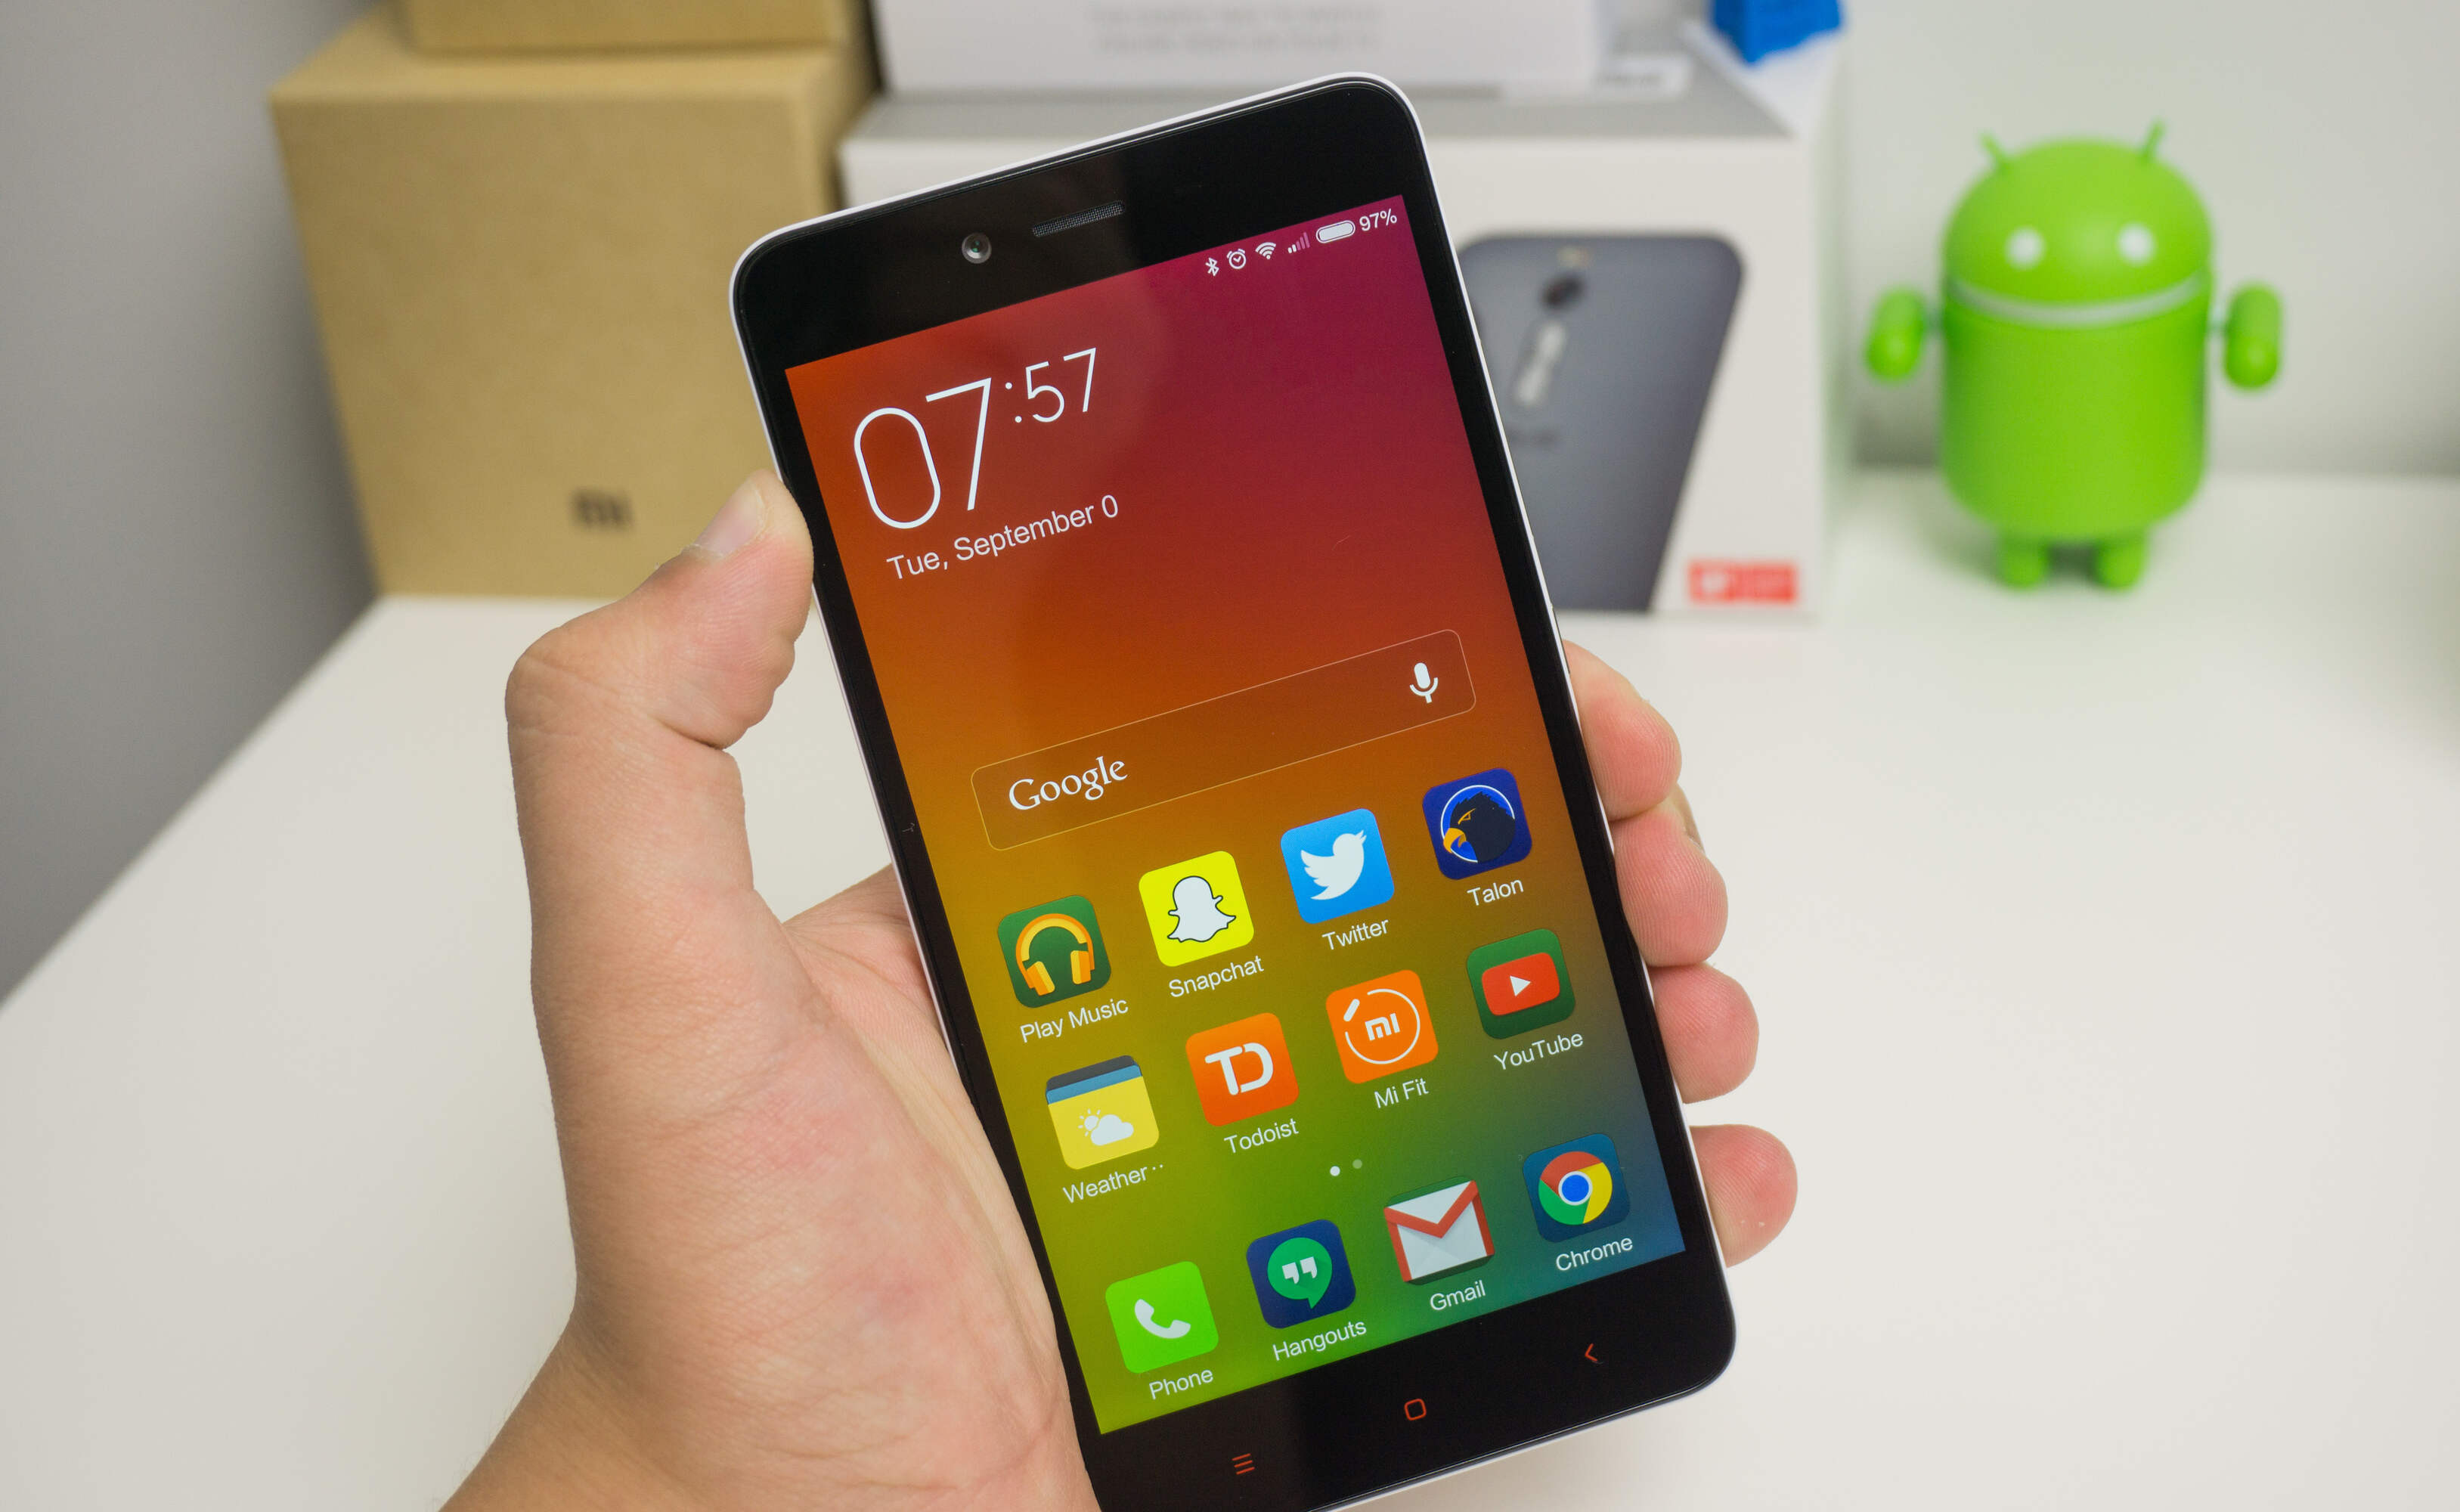 Stay Connected: Resetting Network Connection On Redmi 2